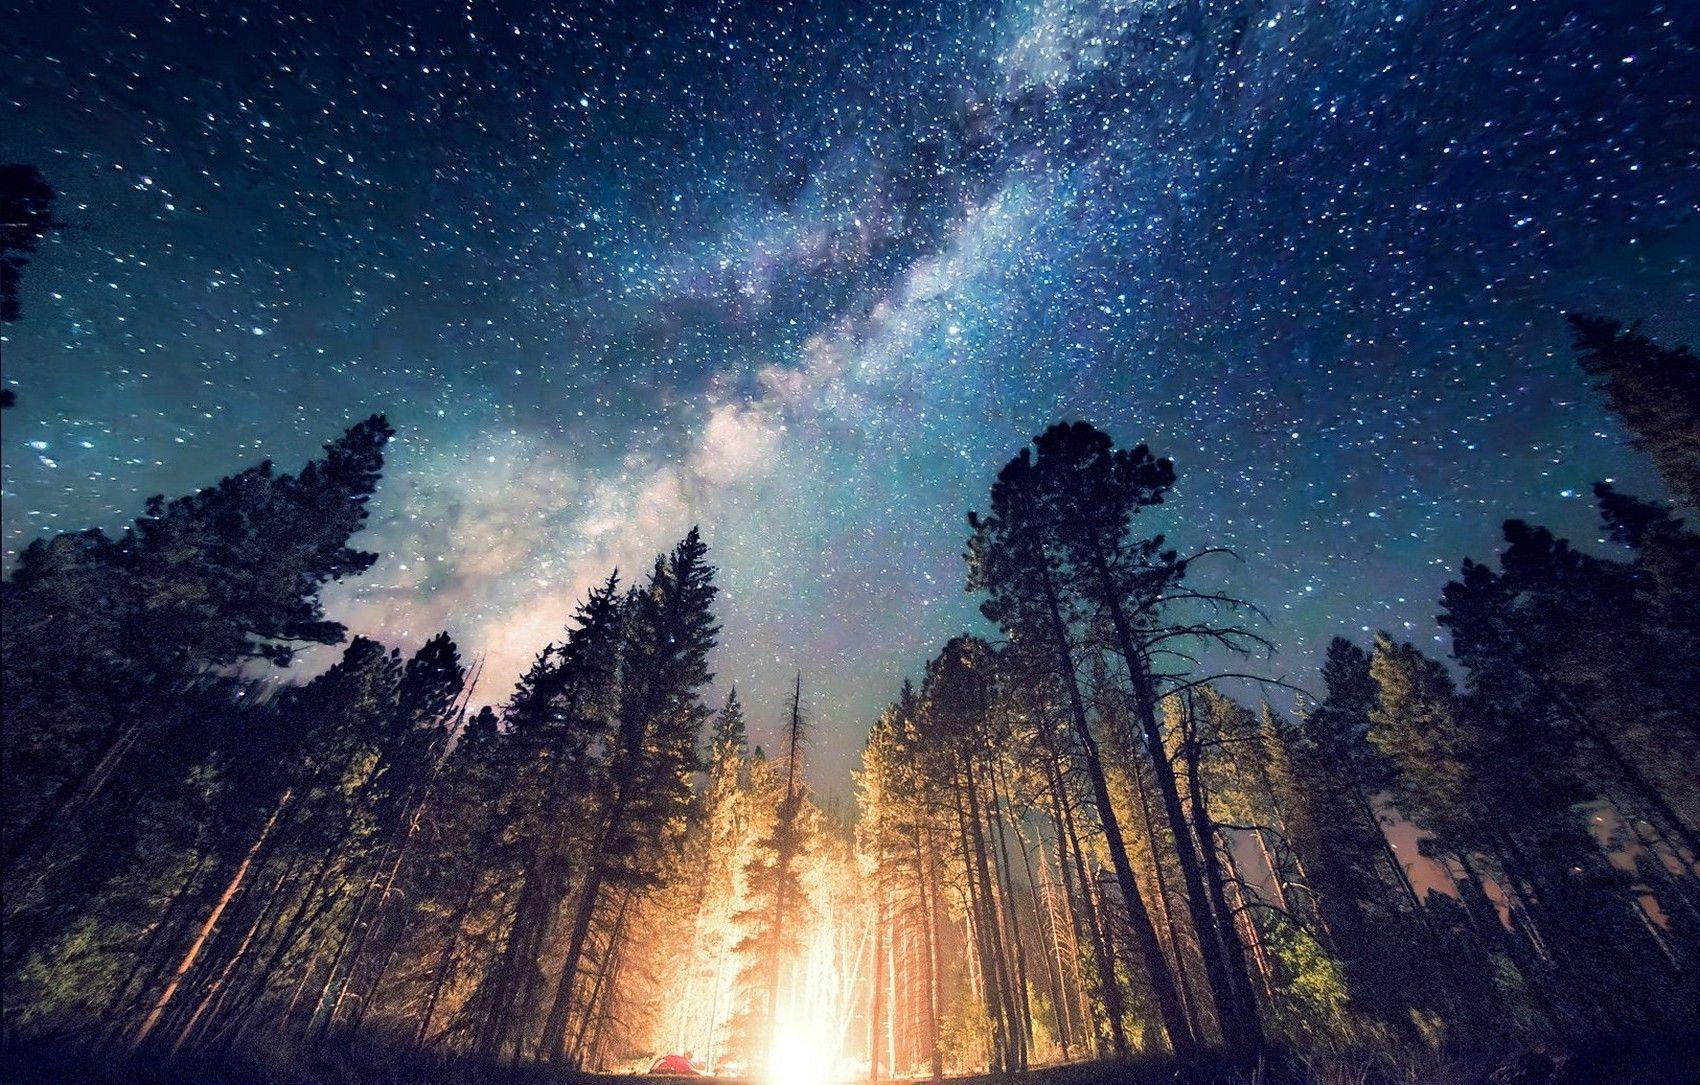 Background Long Exposure Starry Night Milky Way Galaxy Nature